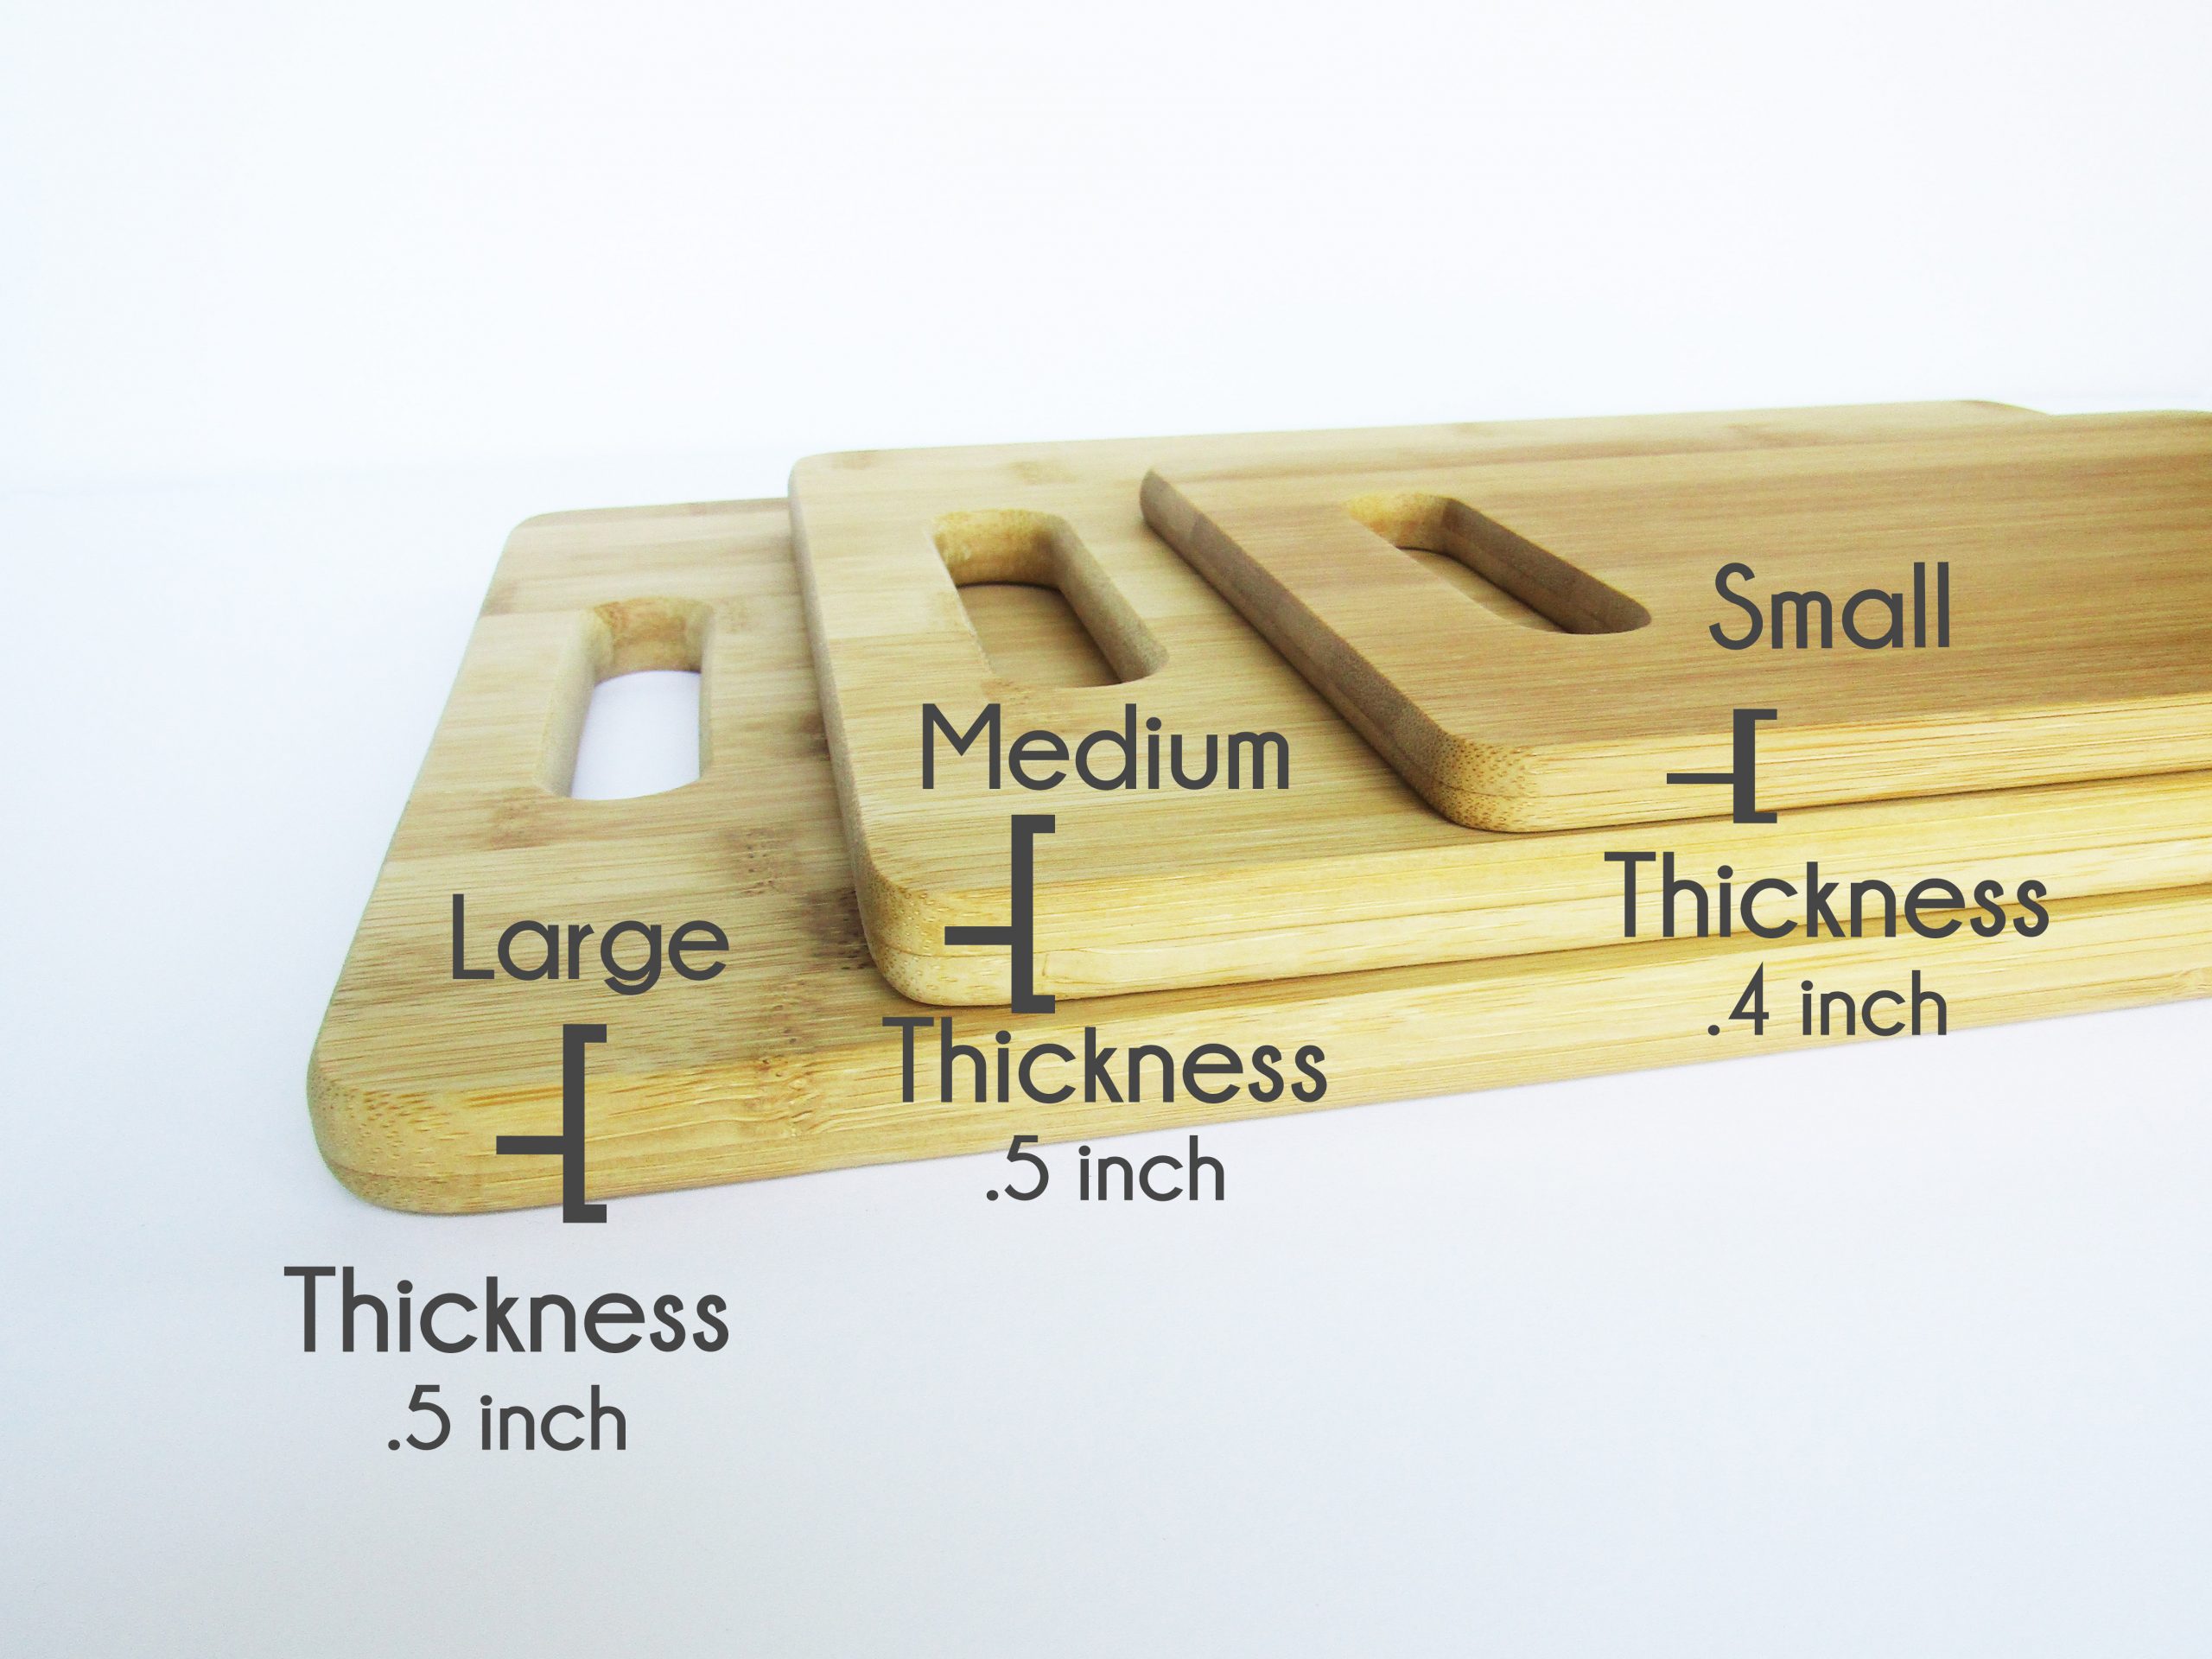 https://julssweetdesigns.com/wp-content/uploads/2020/09/3-Cutting-Board-Handles-Stock-2-Sizes-Thickness-scaled.jpg